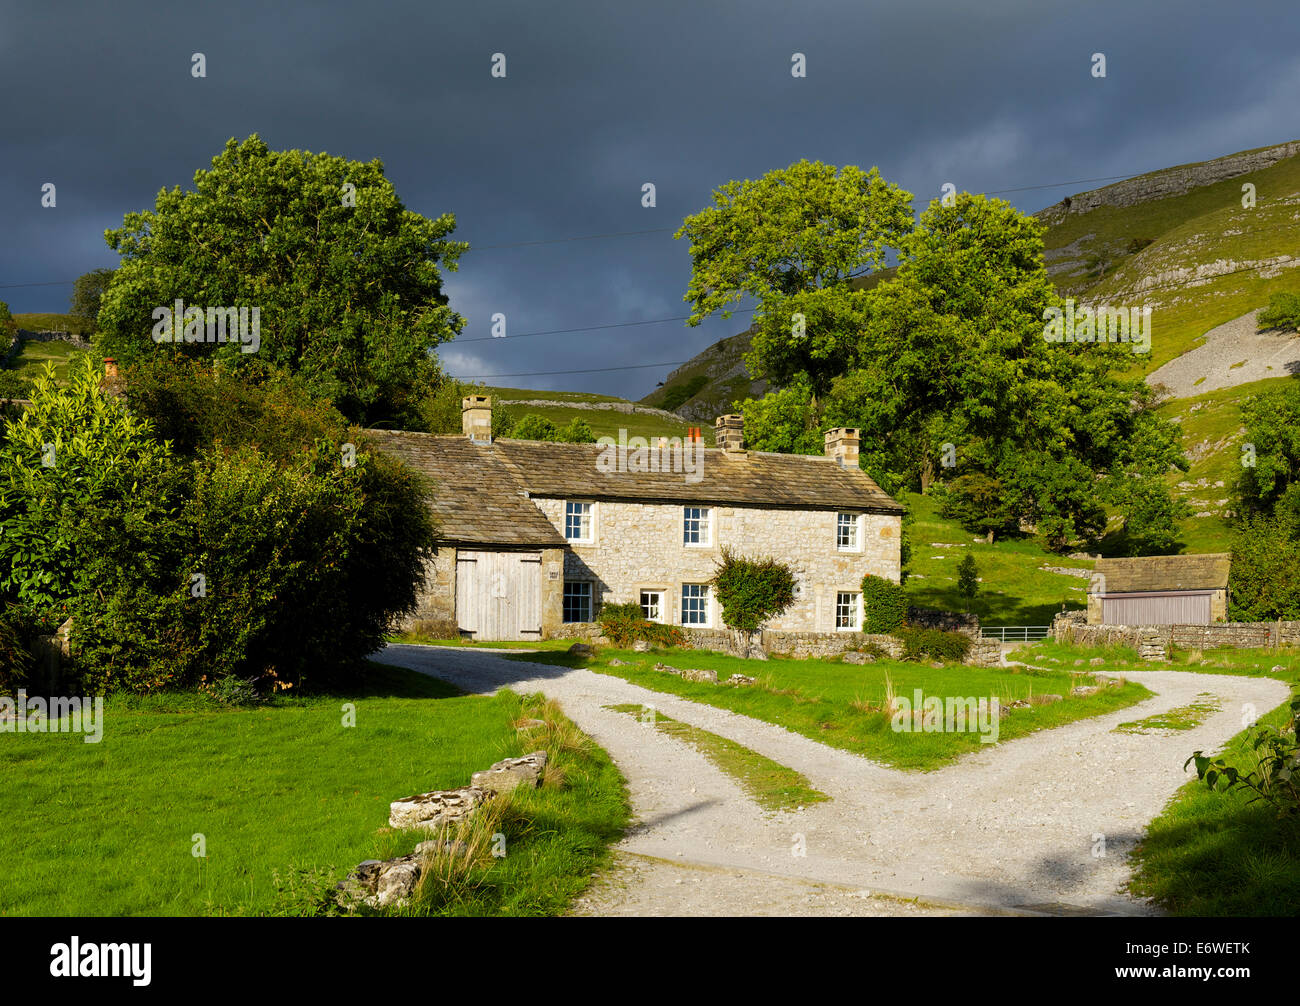 Farm in the village of Conistone, Wharfedale, Yorkshire Dales National Park, North Yorkshire, England UK Stock Photo